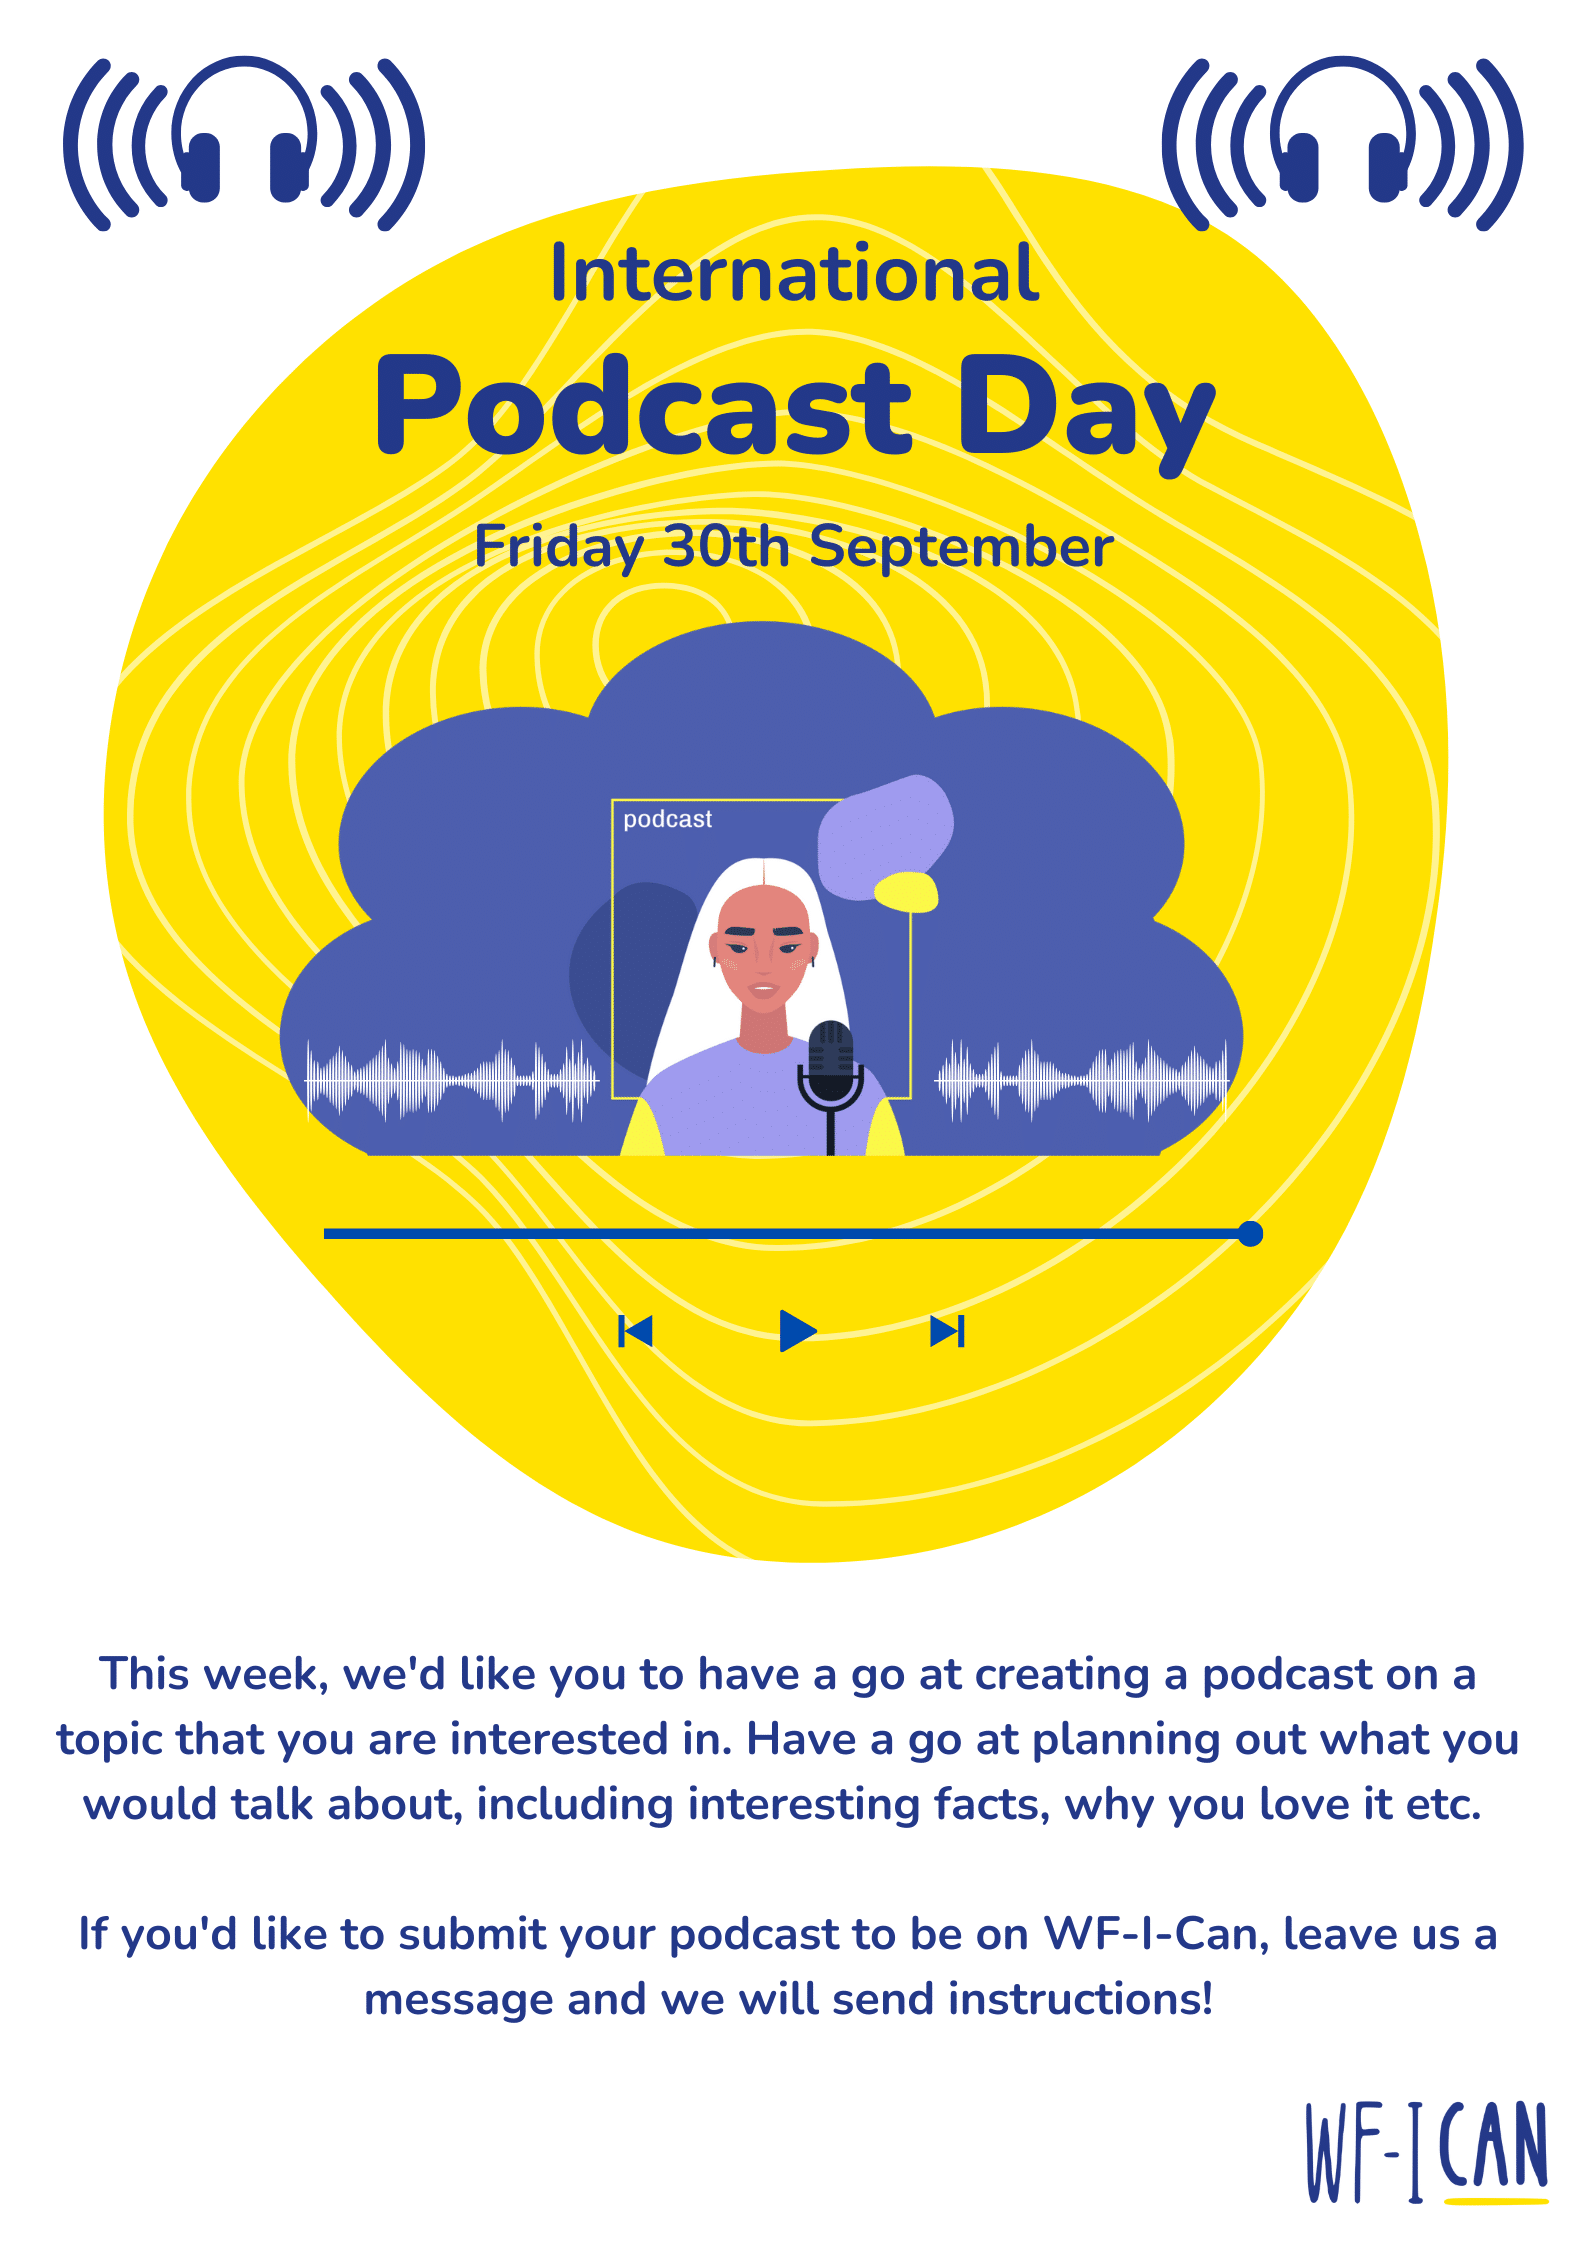 Create your own podcast for International Podcast Day 30th September